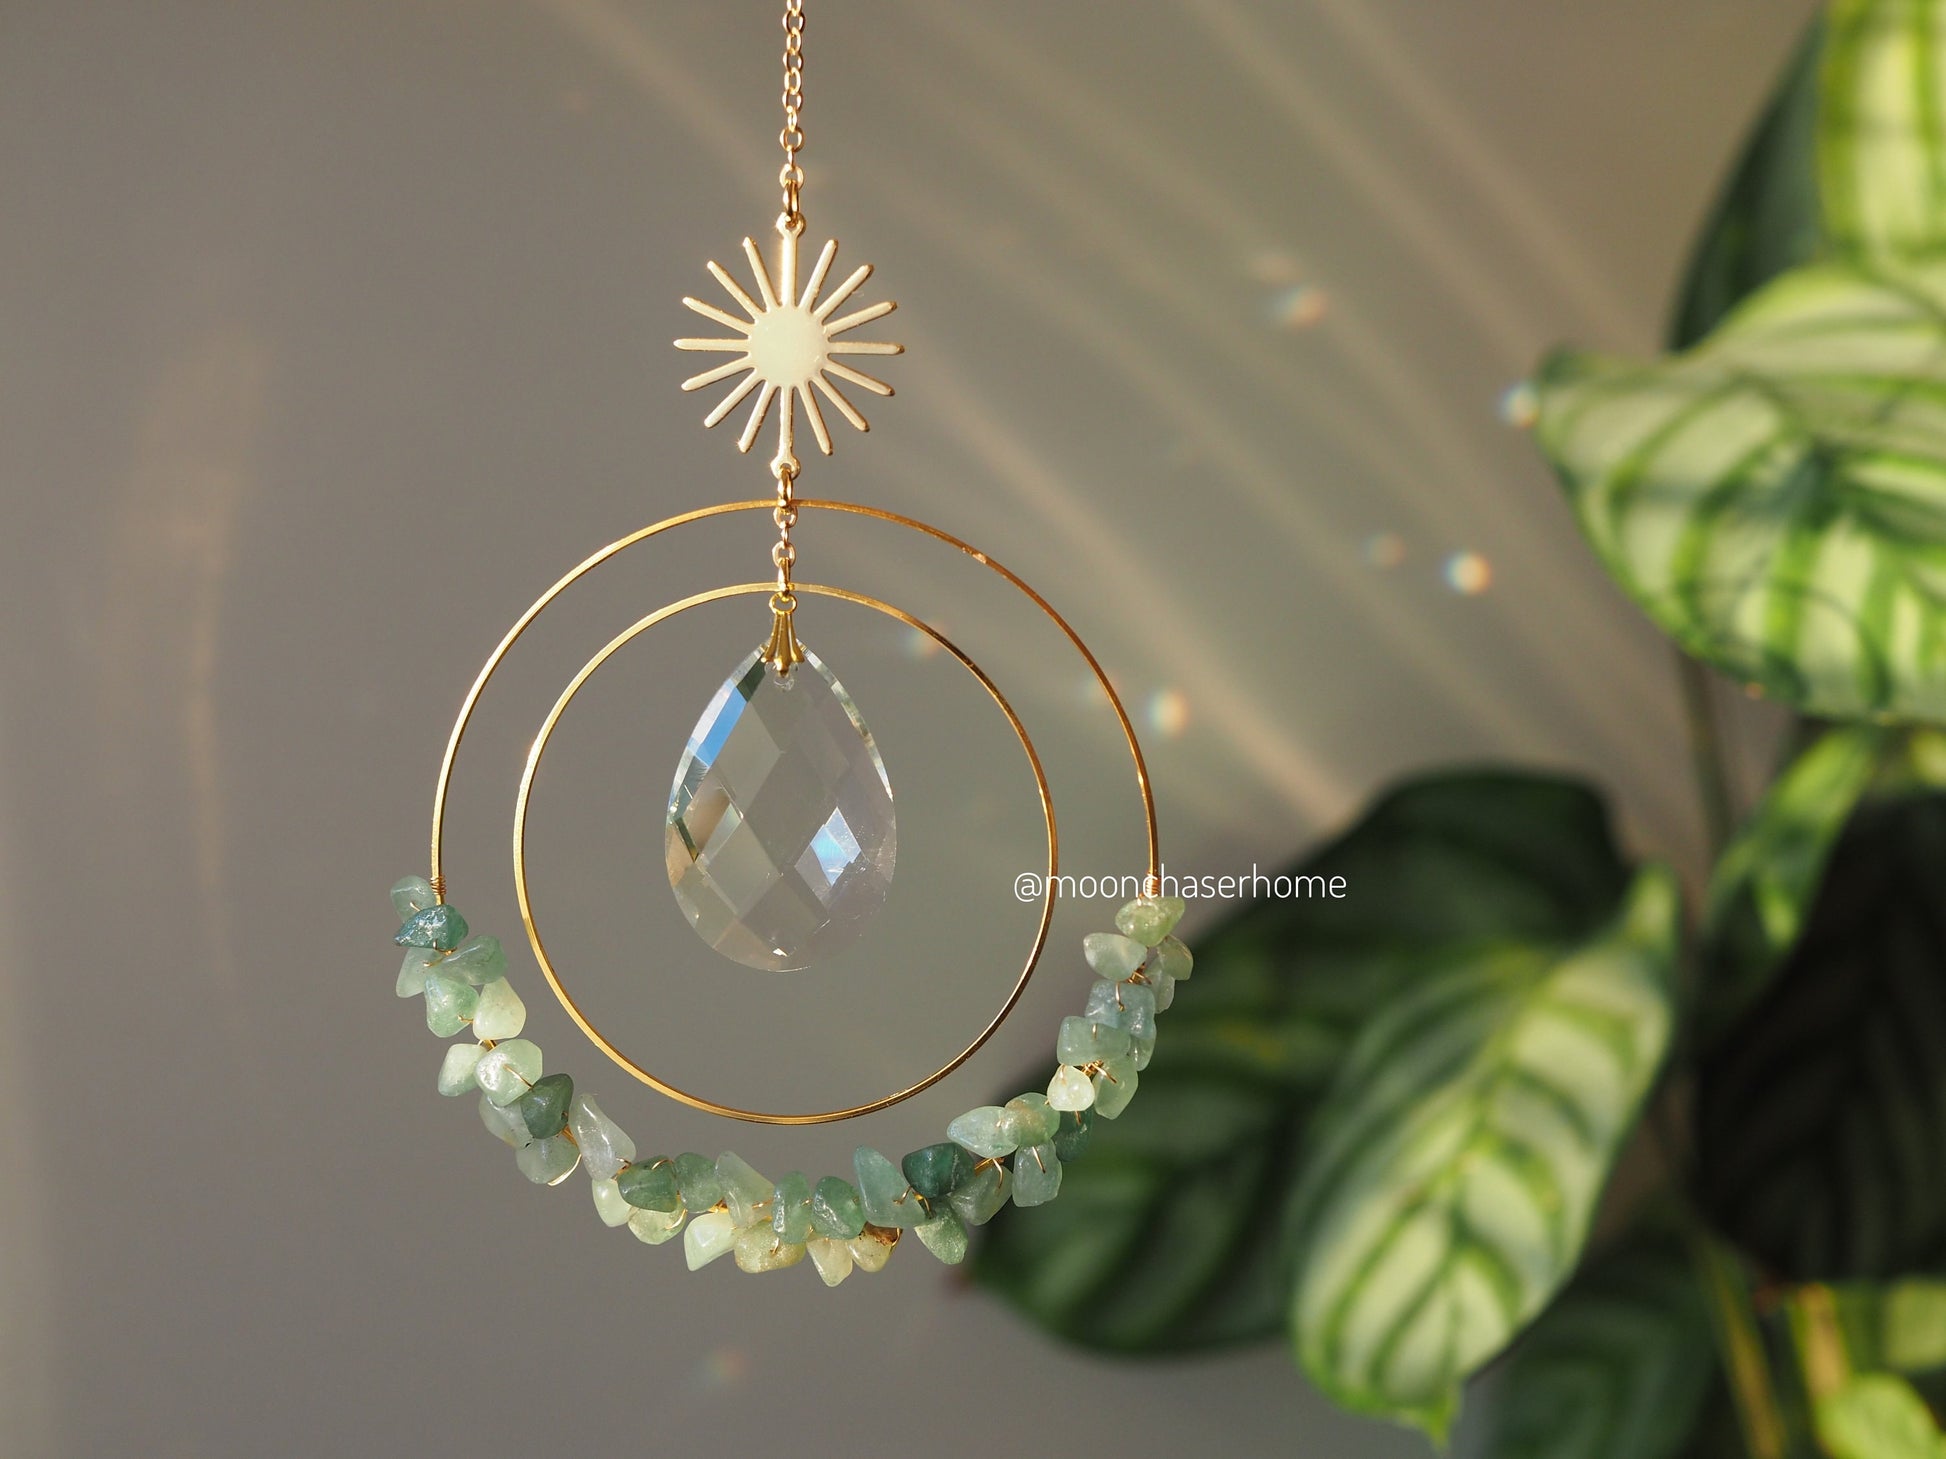 Aziza suncatcher with gold plated SUN and glass beads, crystal car charm, rainbow prism, light diffuser,boho home decoration, gift idea for